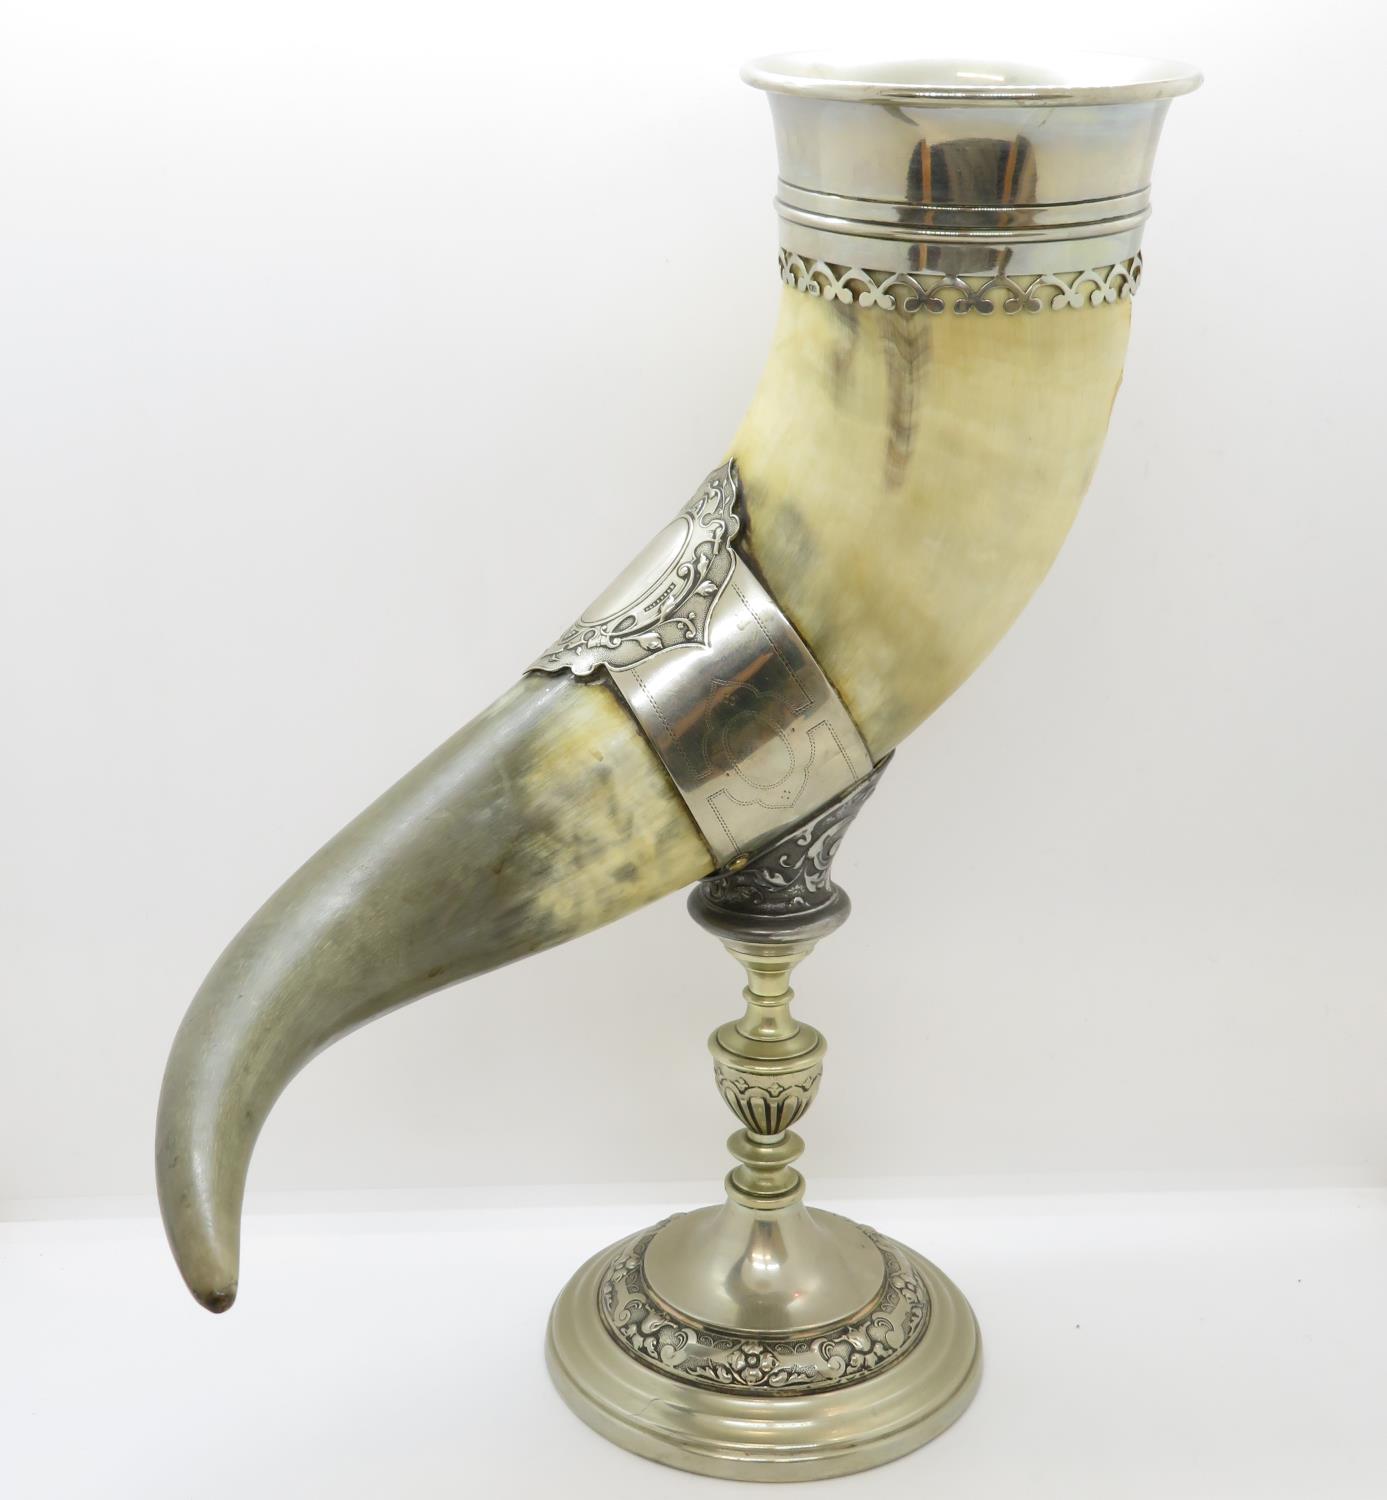 12" high silver plated ornamental drinking horn